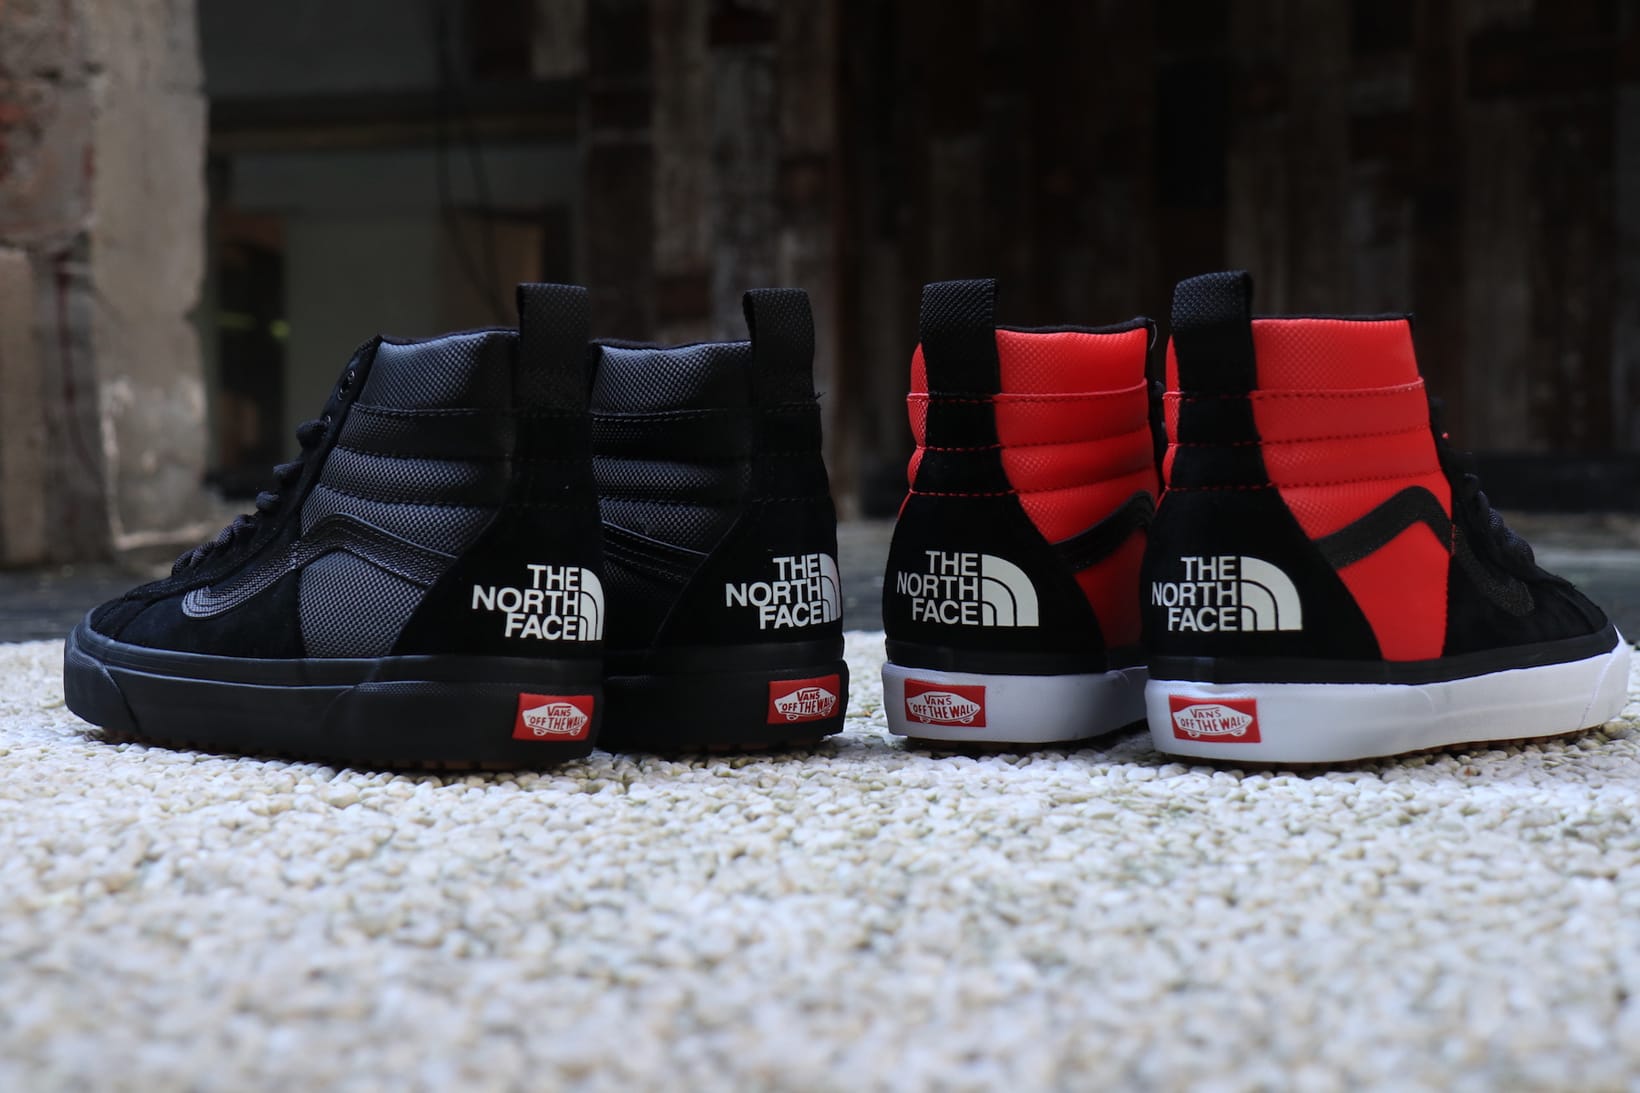 North Face x Vans 2017 Fall Collection 